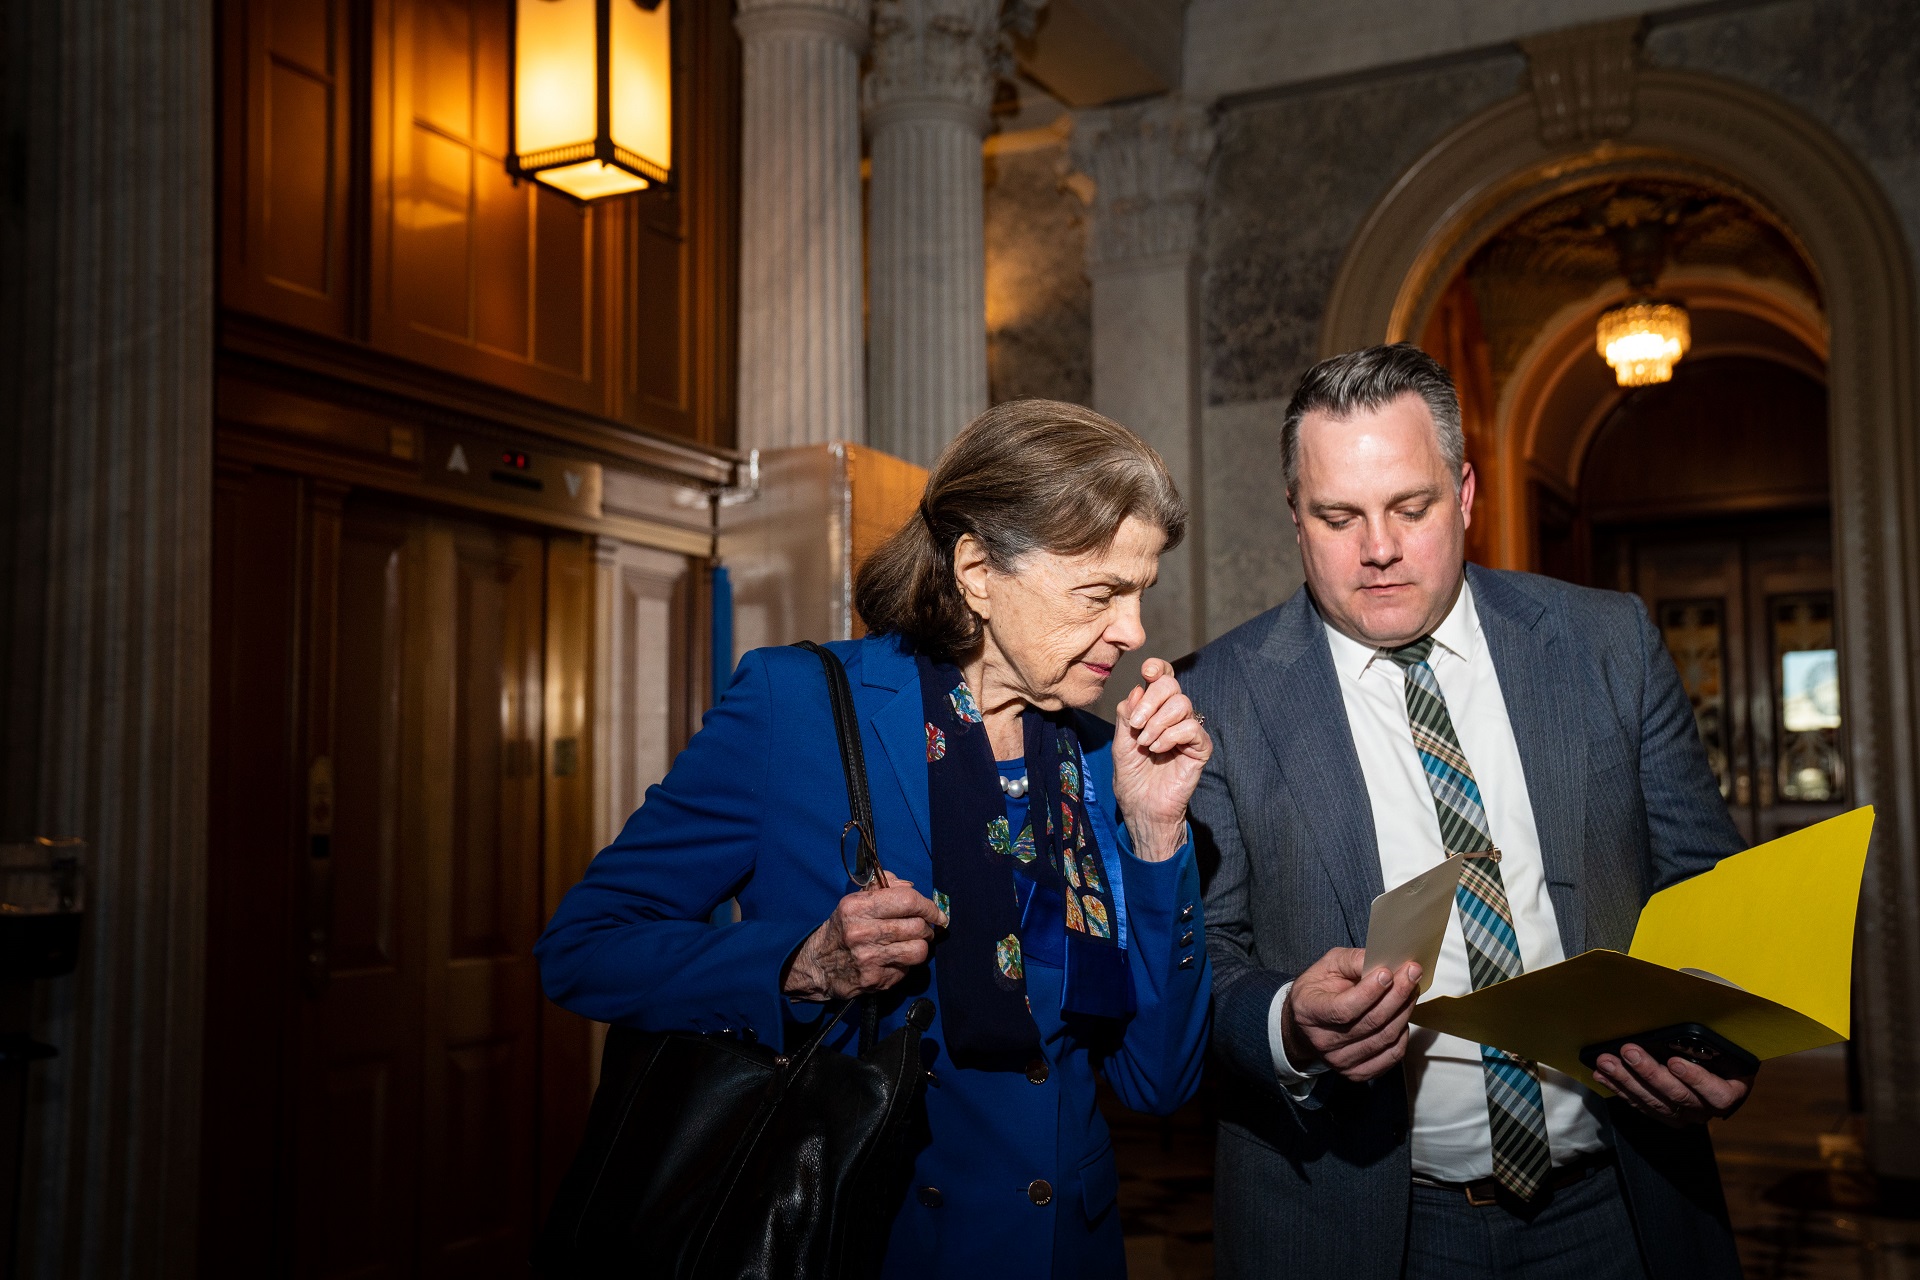 An older white woman with light, brown hair and a blue business suit stands next to another man with gray hair and a gray suit. He holds a yellow folder and is showing the woman a document inside a government building.